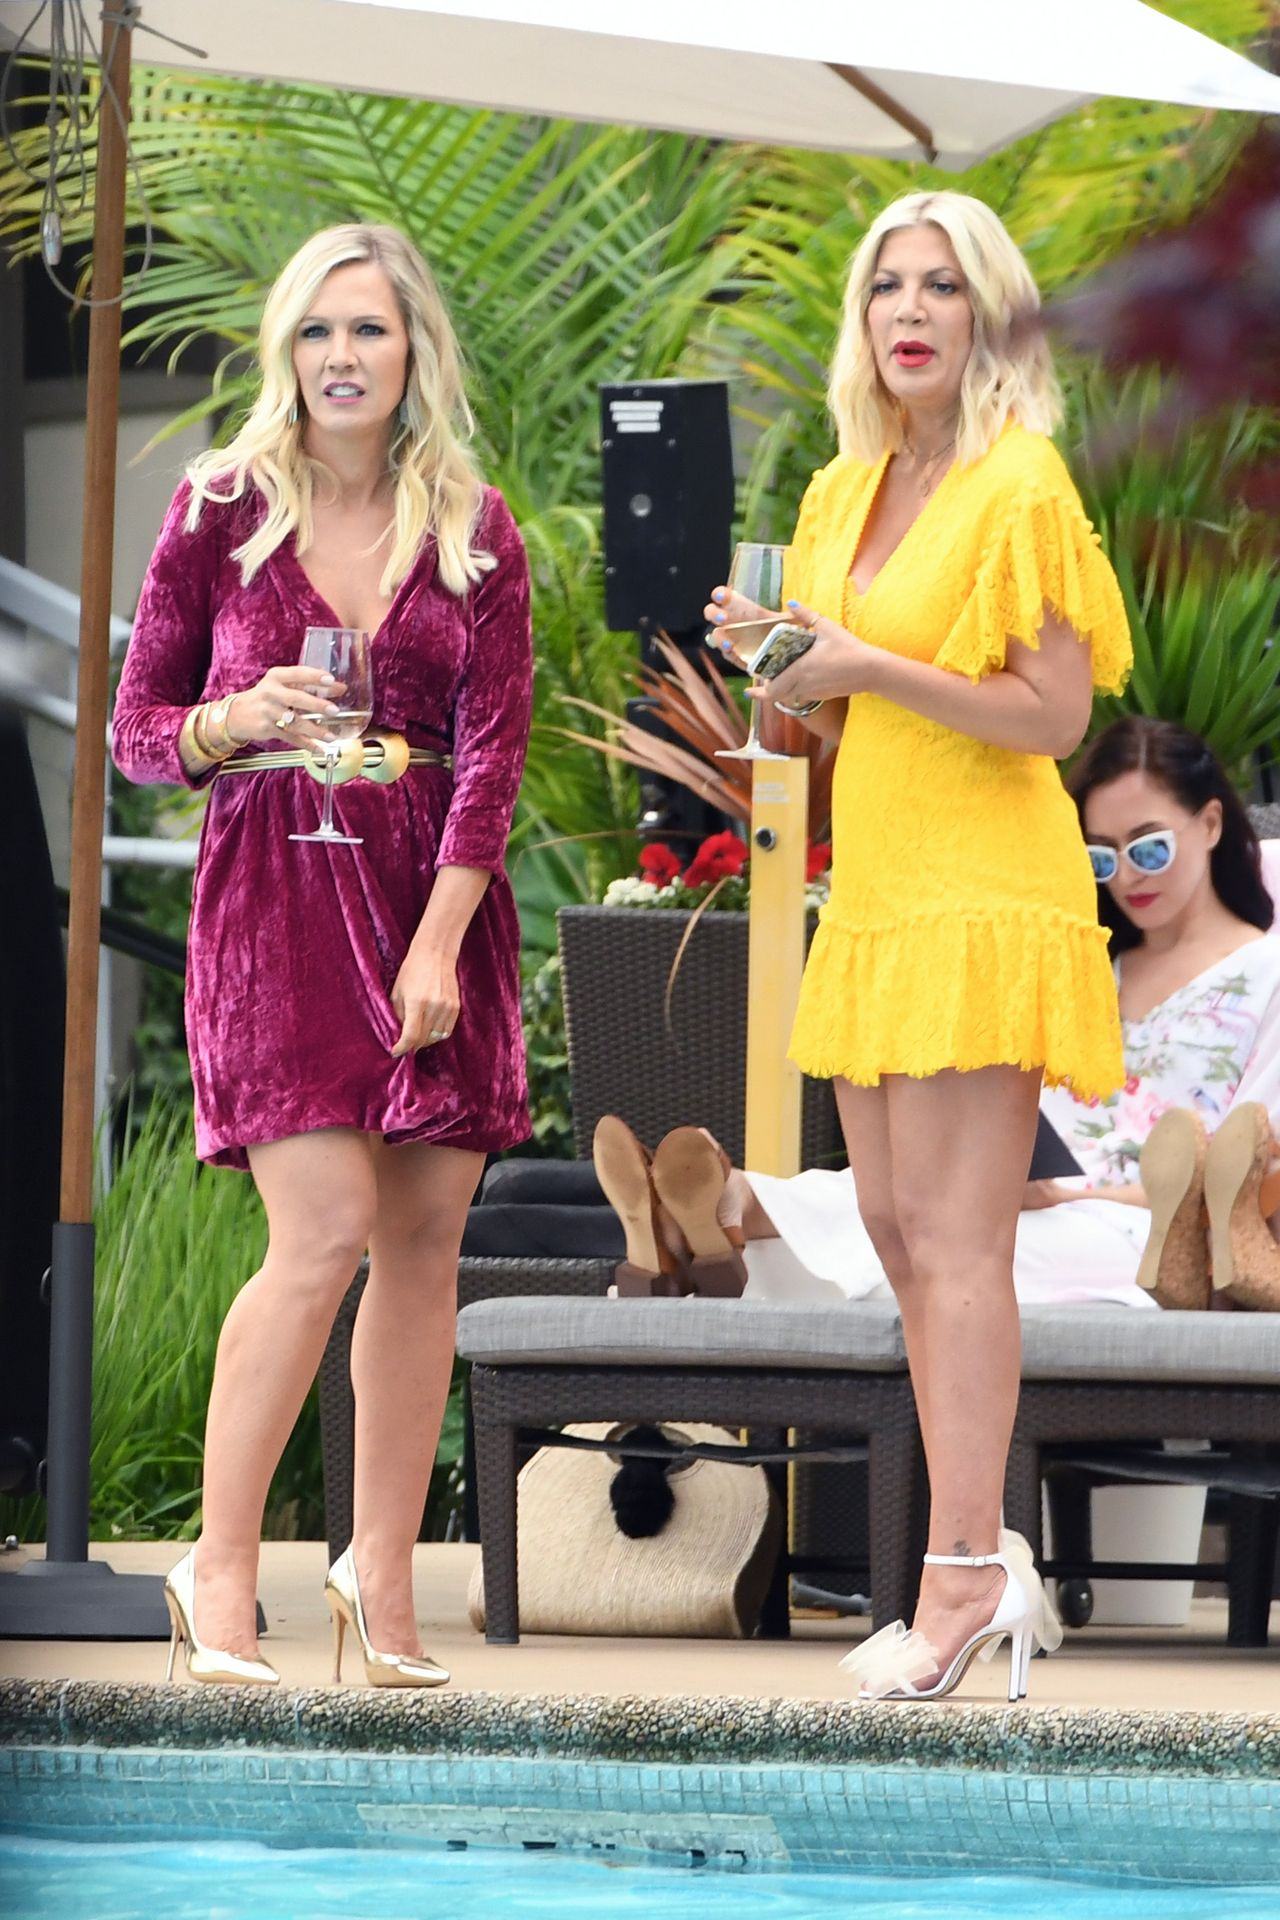 Tori Spelling And Jennie Garth Shows Off Great Cleavage Thefappening Link